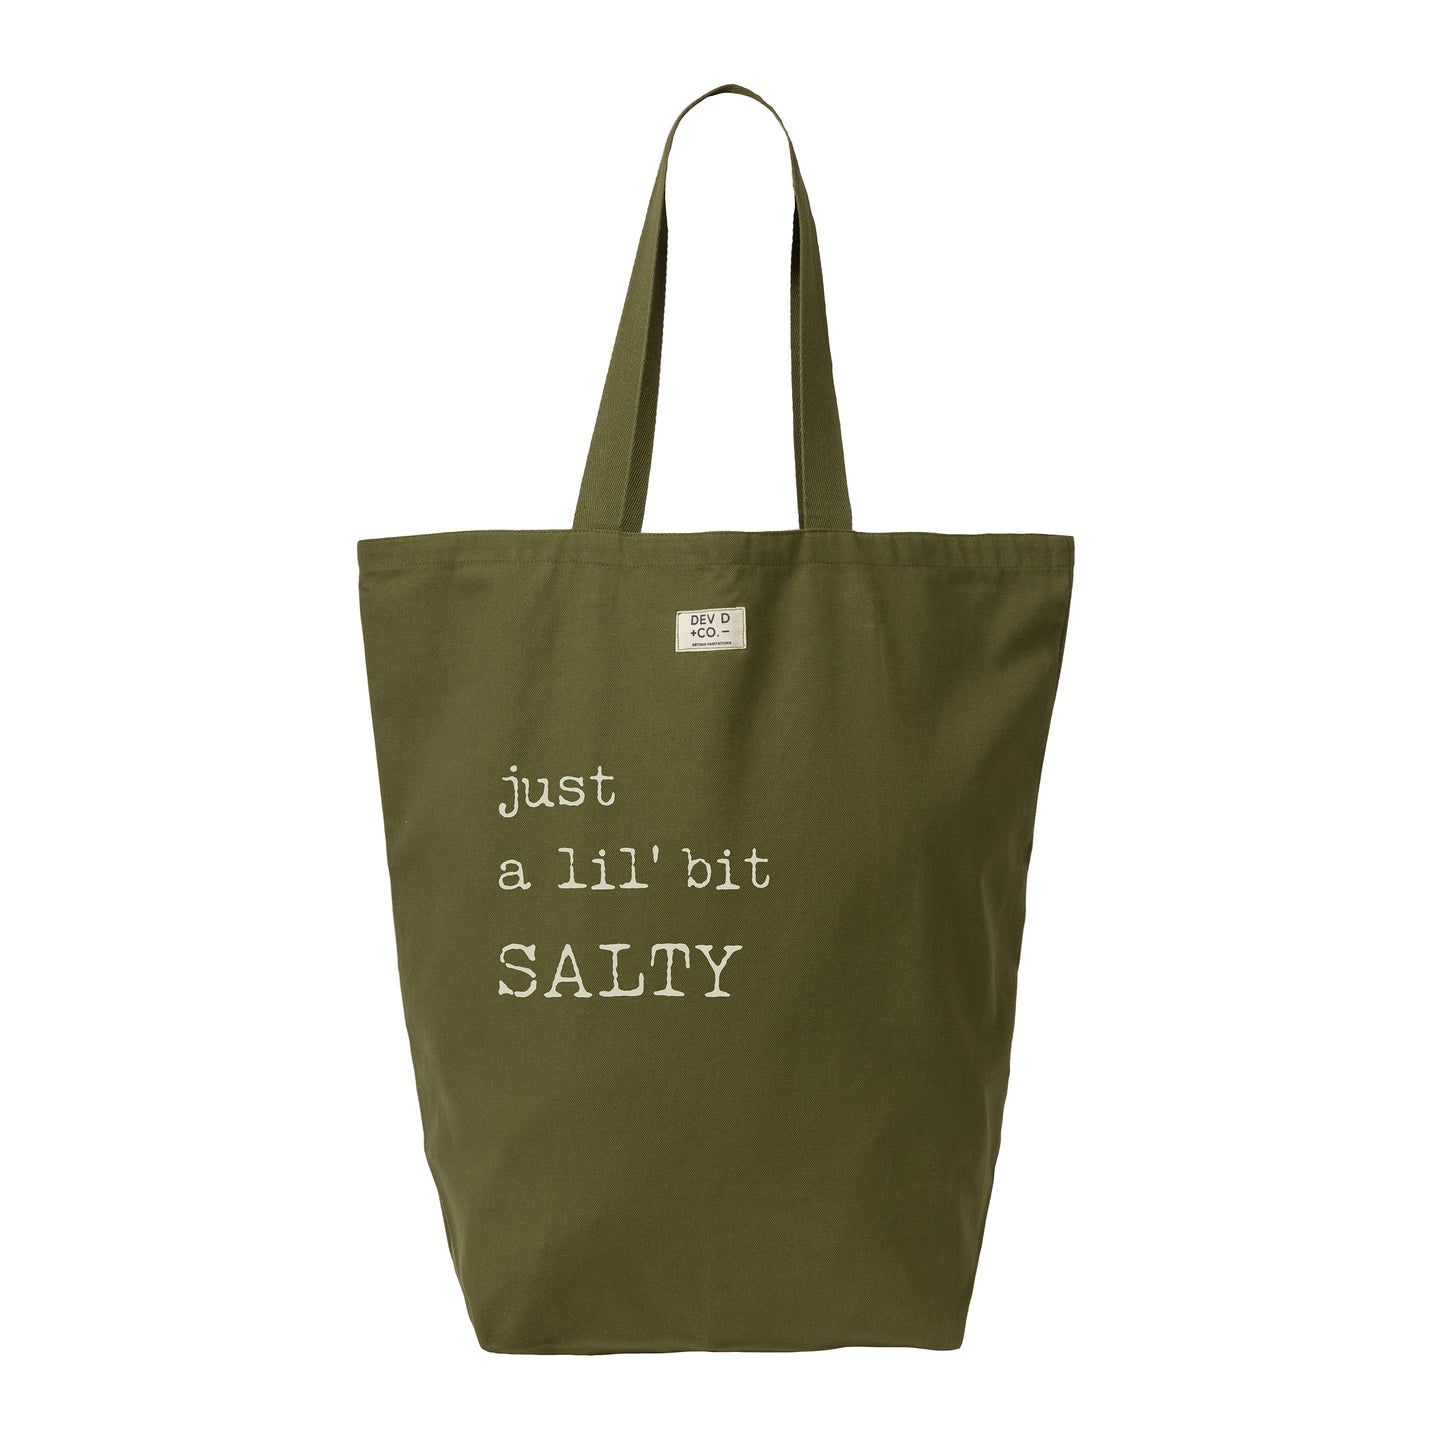 Just A Lil’ Bit Salty - Canvas Tote Bag with Pocket